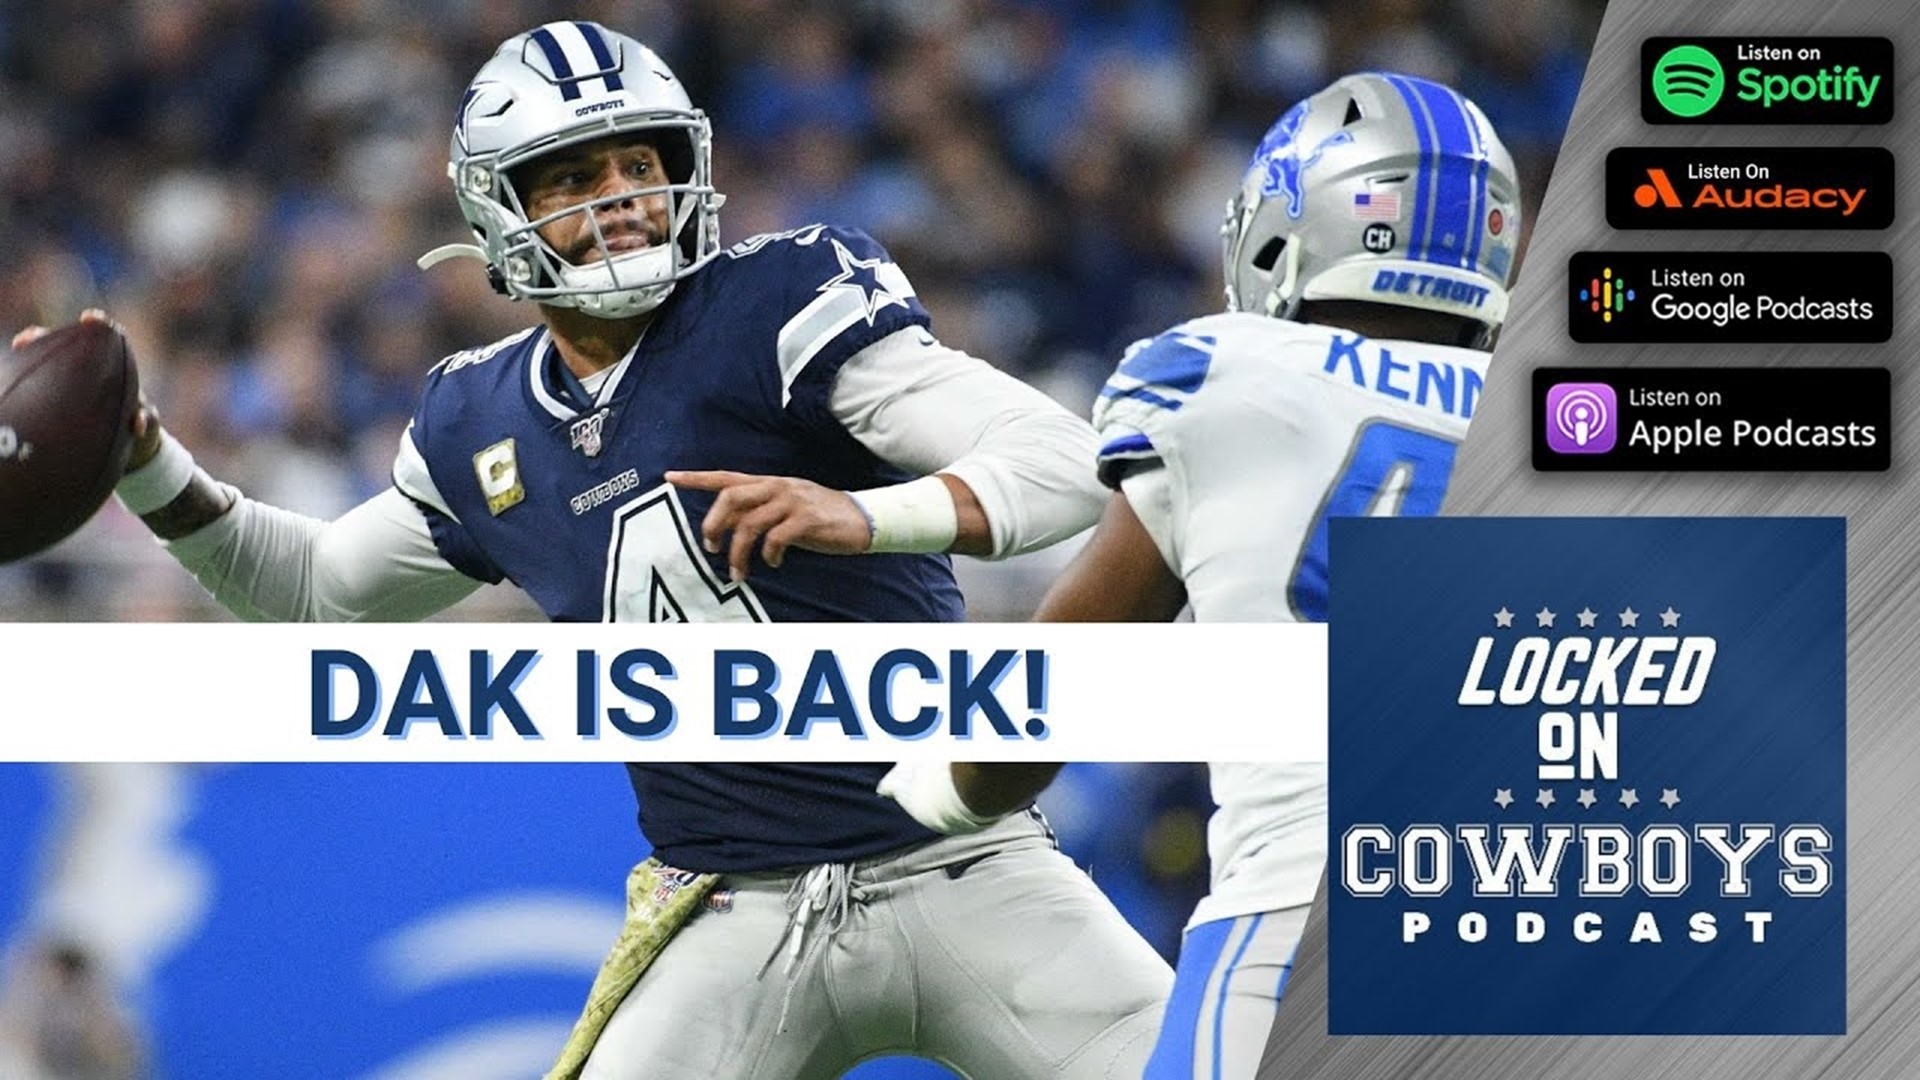 Marcus Mosher and Landon McCool discuss Dak Prescott returning to the lineup for the Dallas Cowboys.